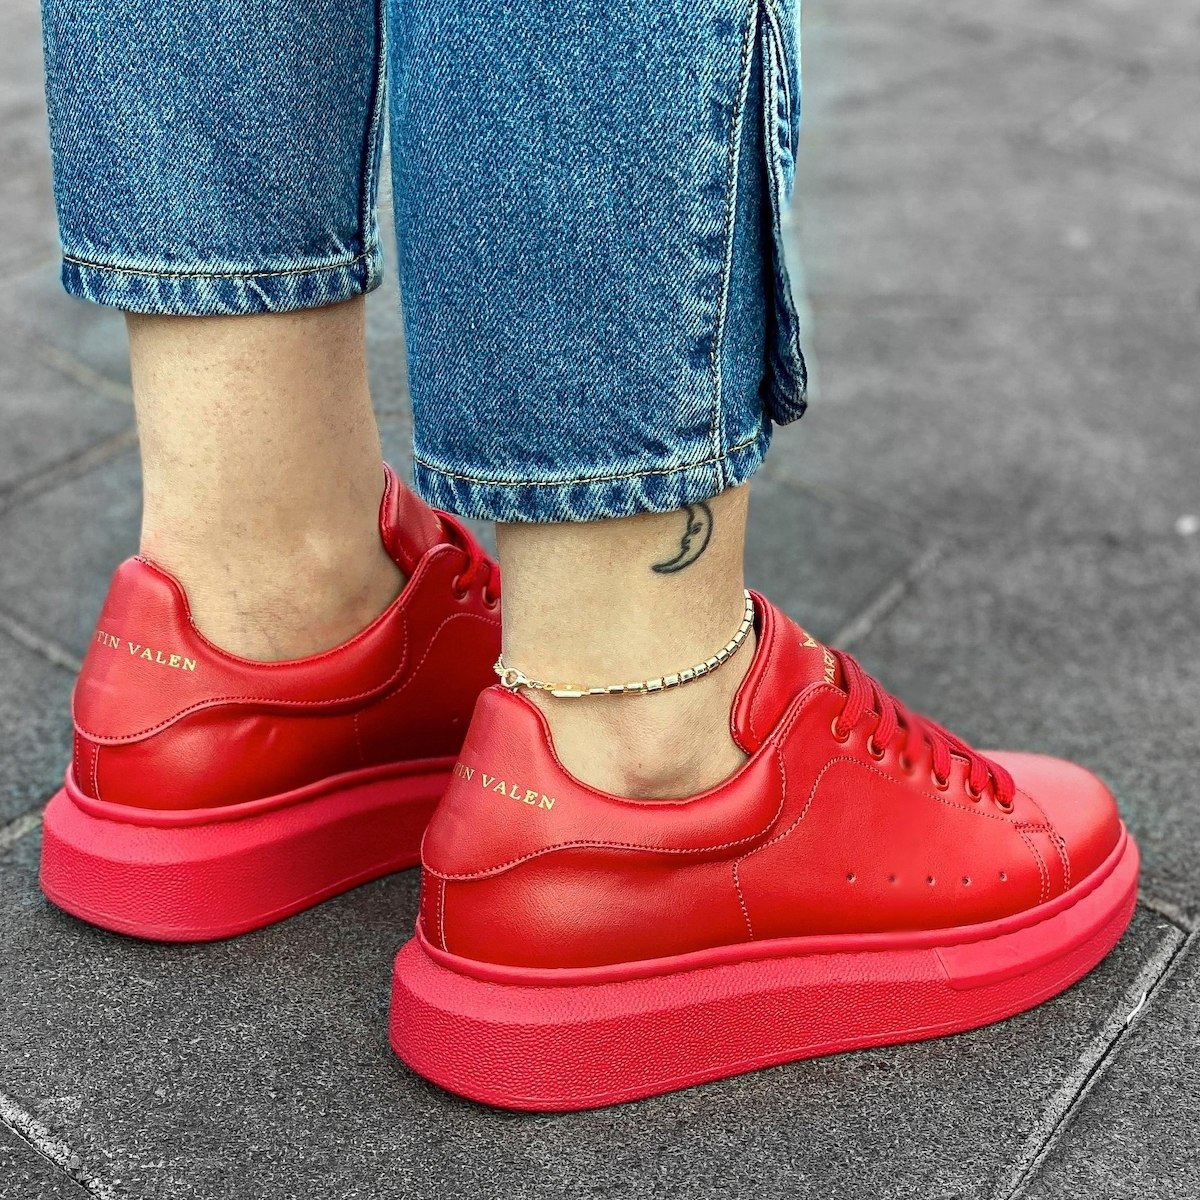 Woman's Hype Sole Sneakers In Full Red - 4